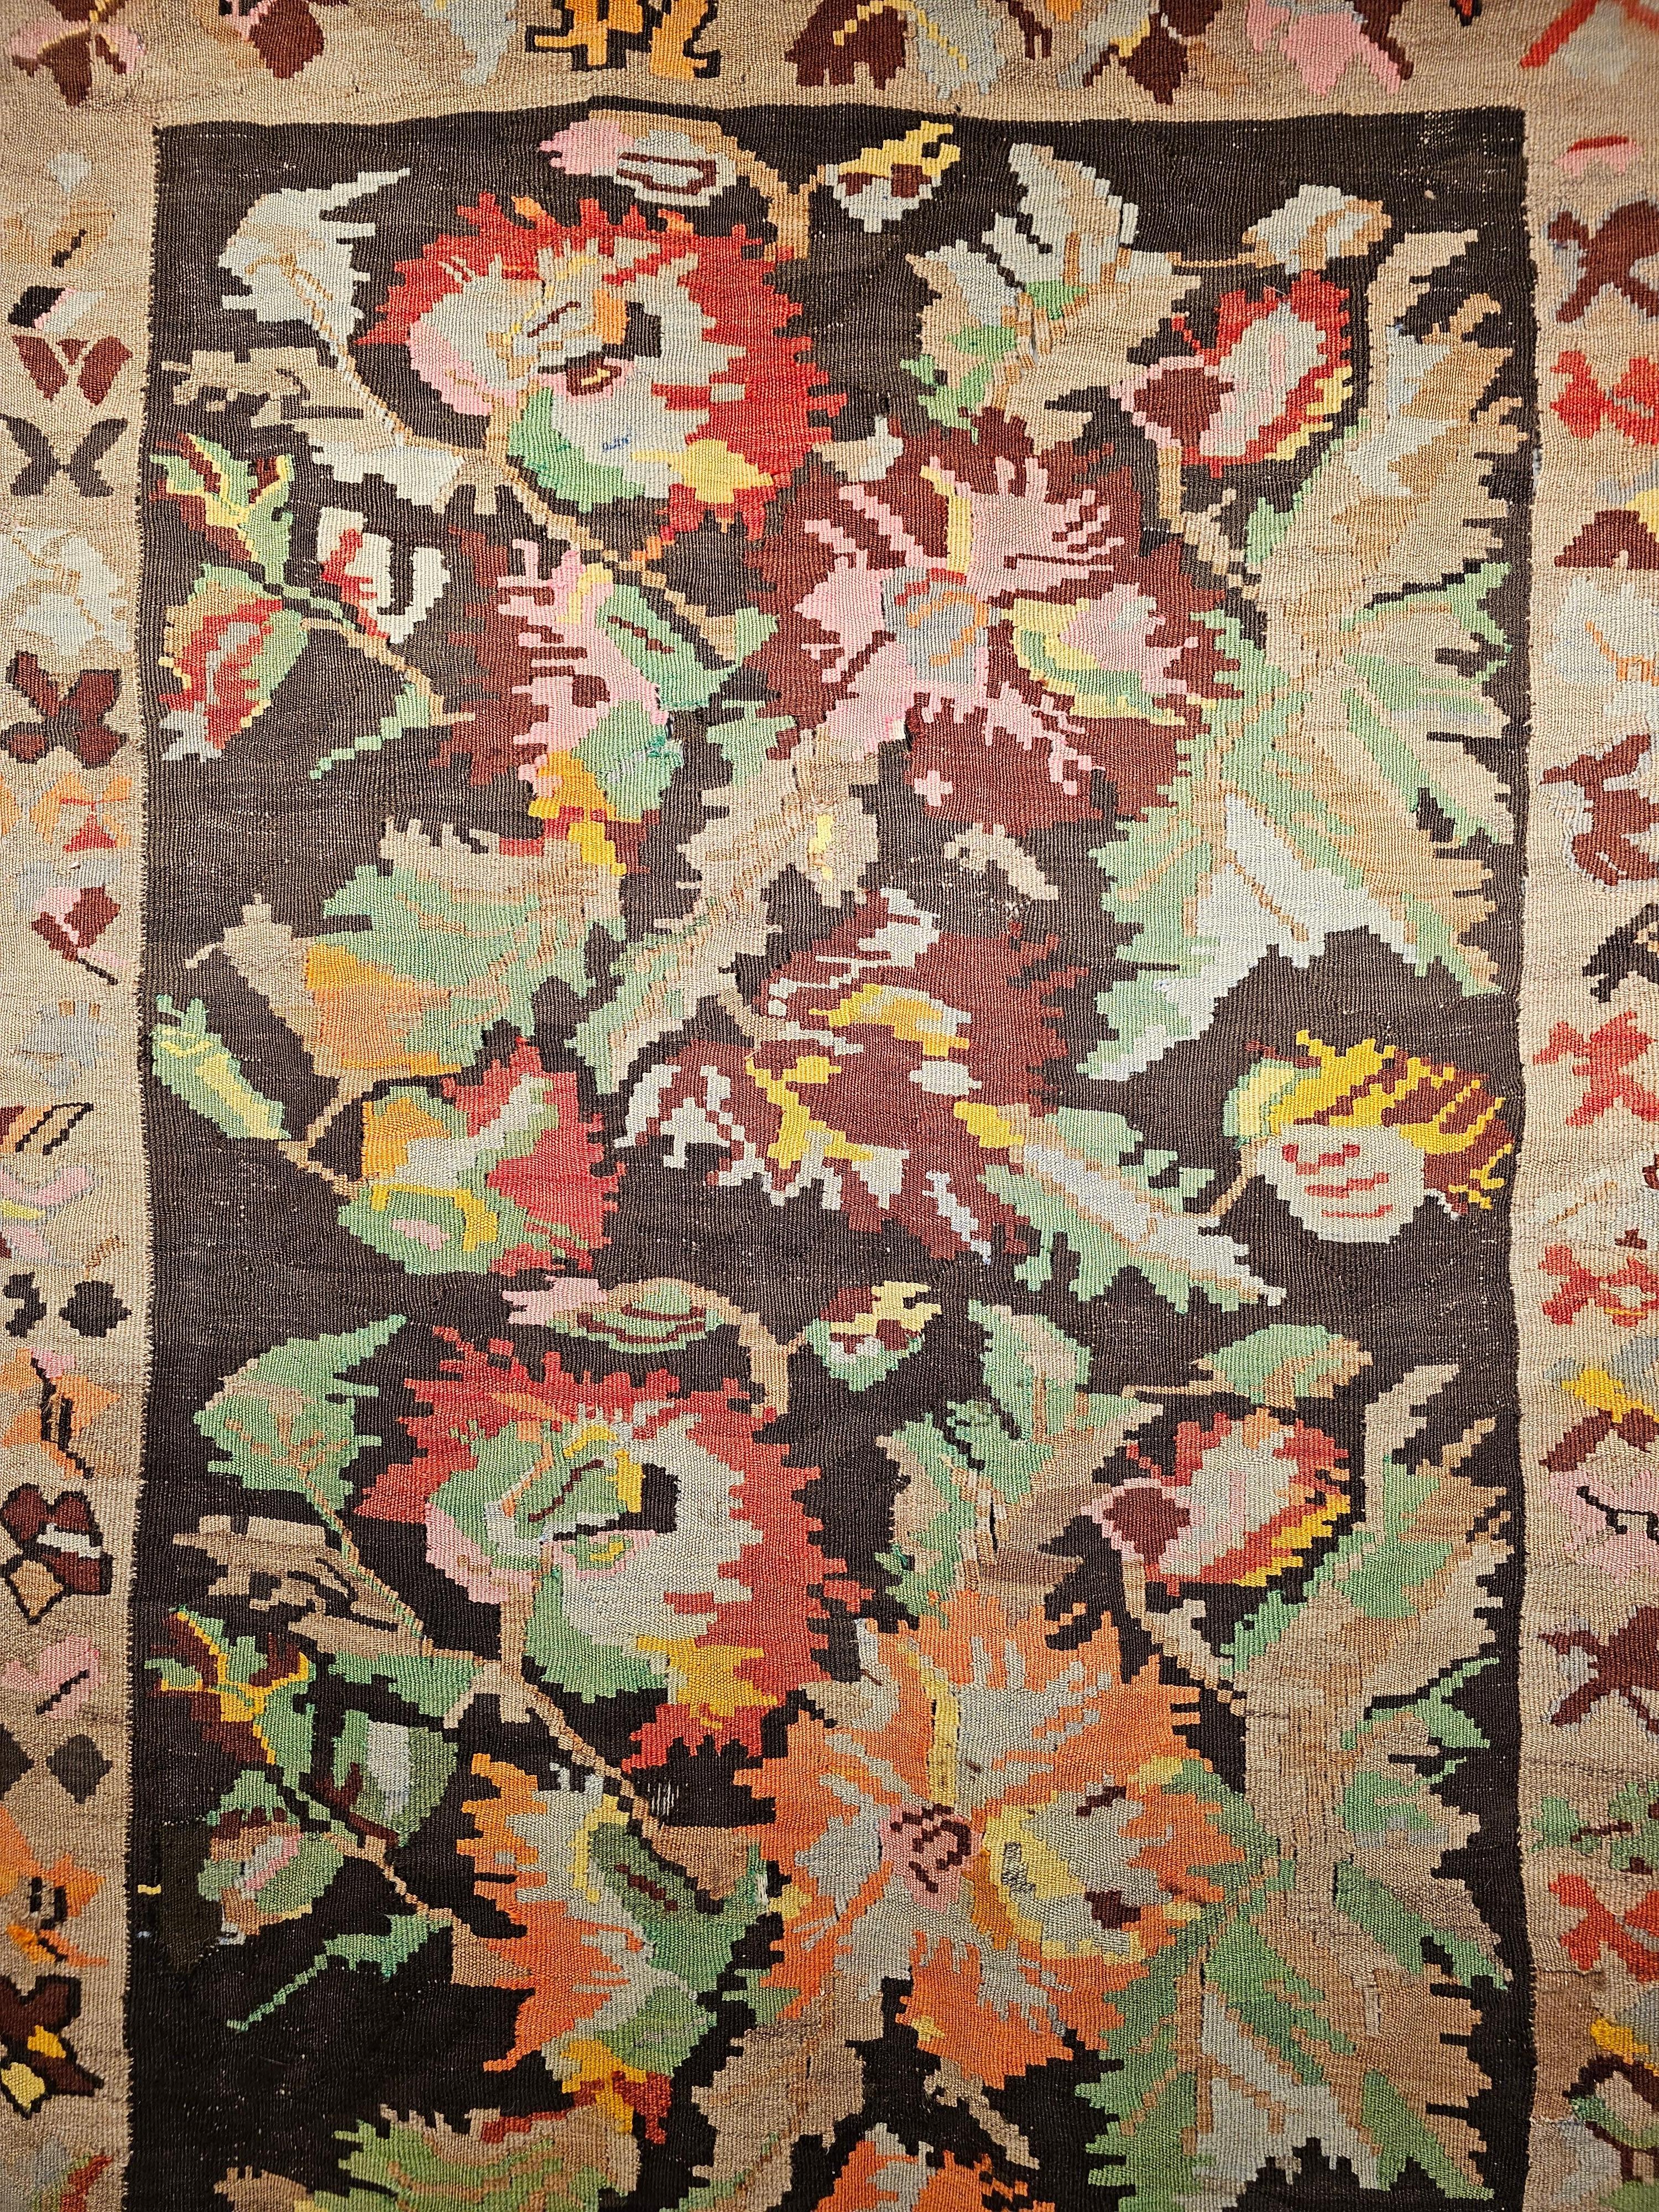 Vintage Karabagh Kilim runner with large floral designs and vibrant colors from the early 1900s. The kilim runner has bright and beautiful colors used in the three bouquets of flowers that cover the dark chocolate field. The floral design colors